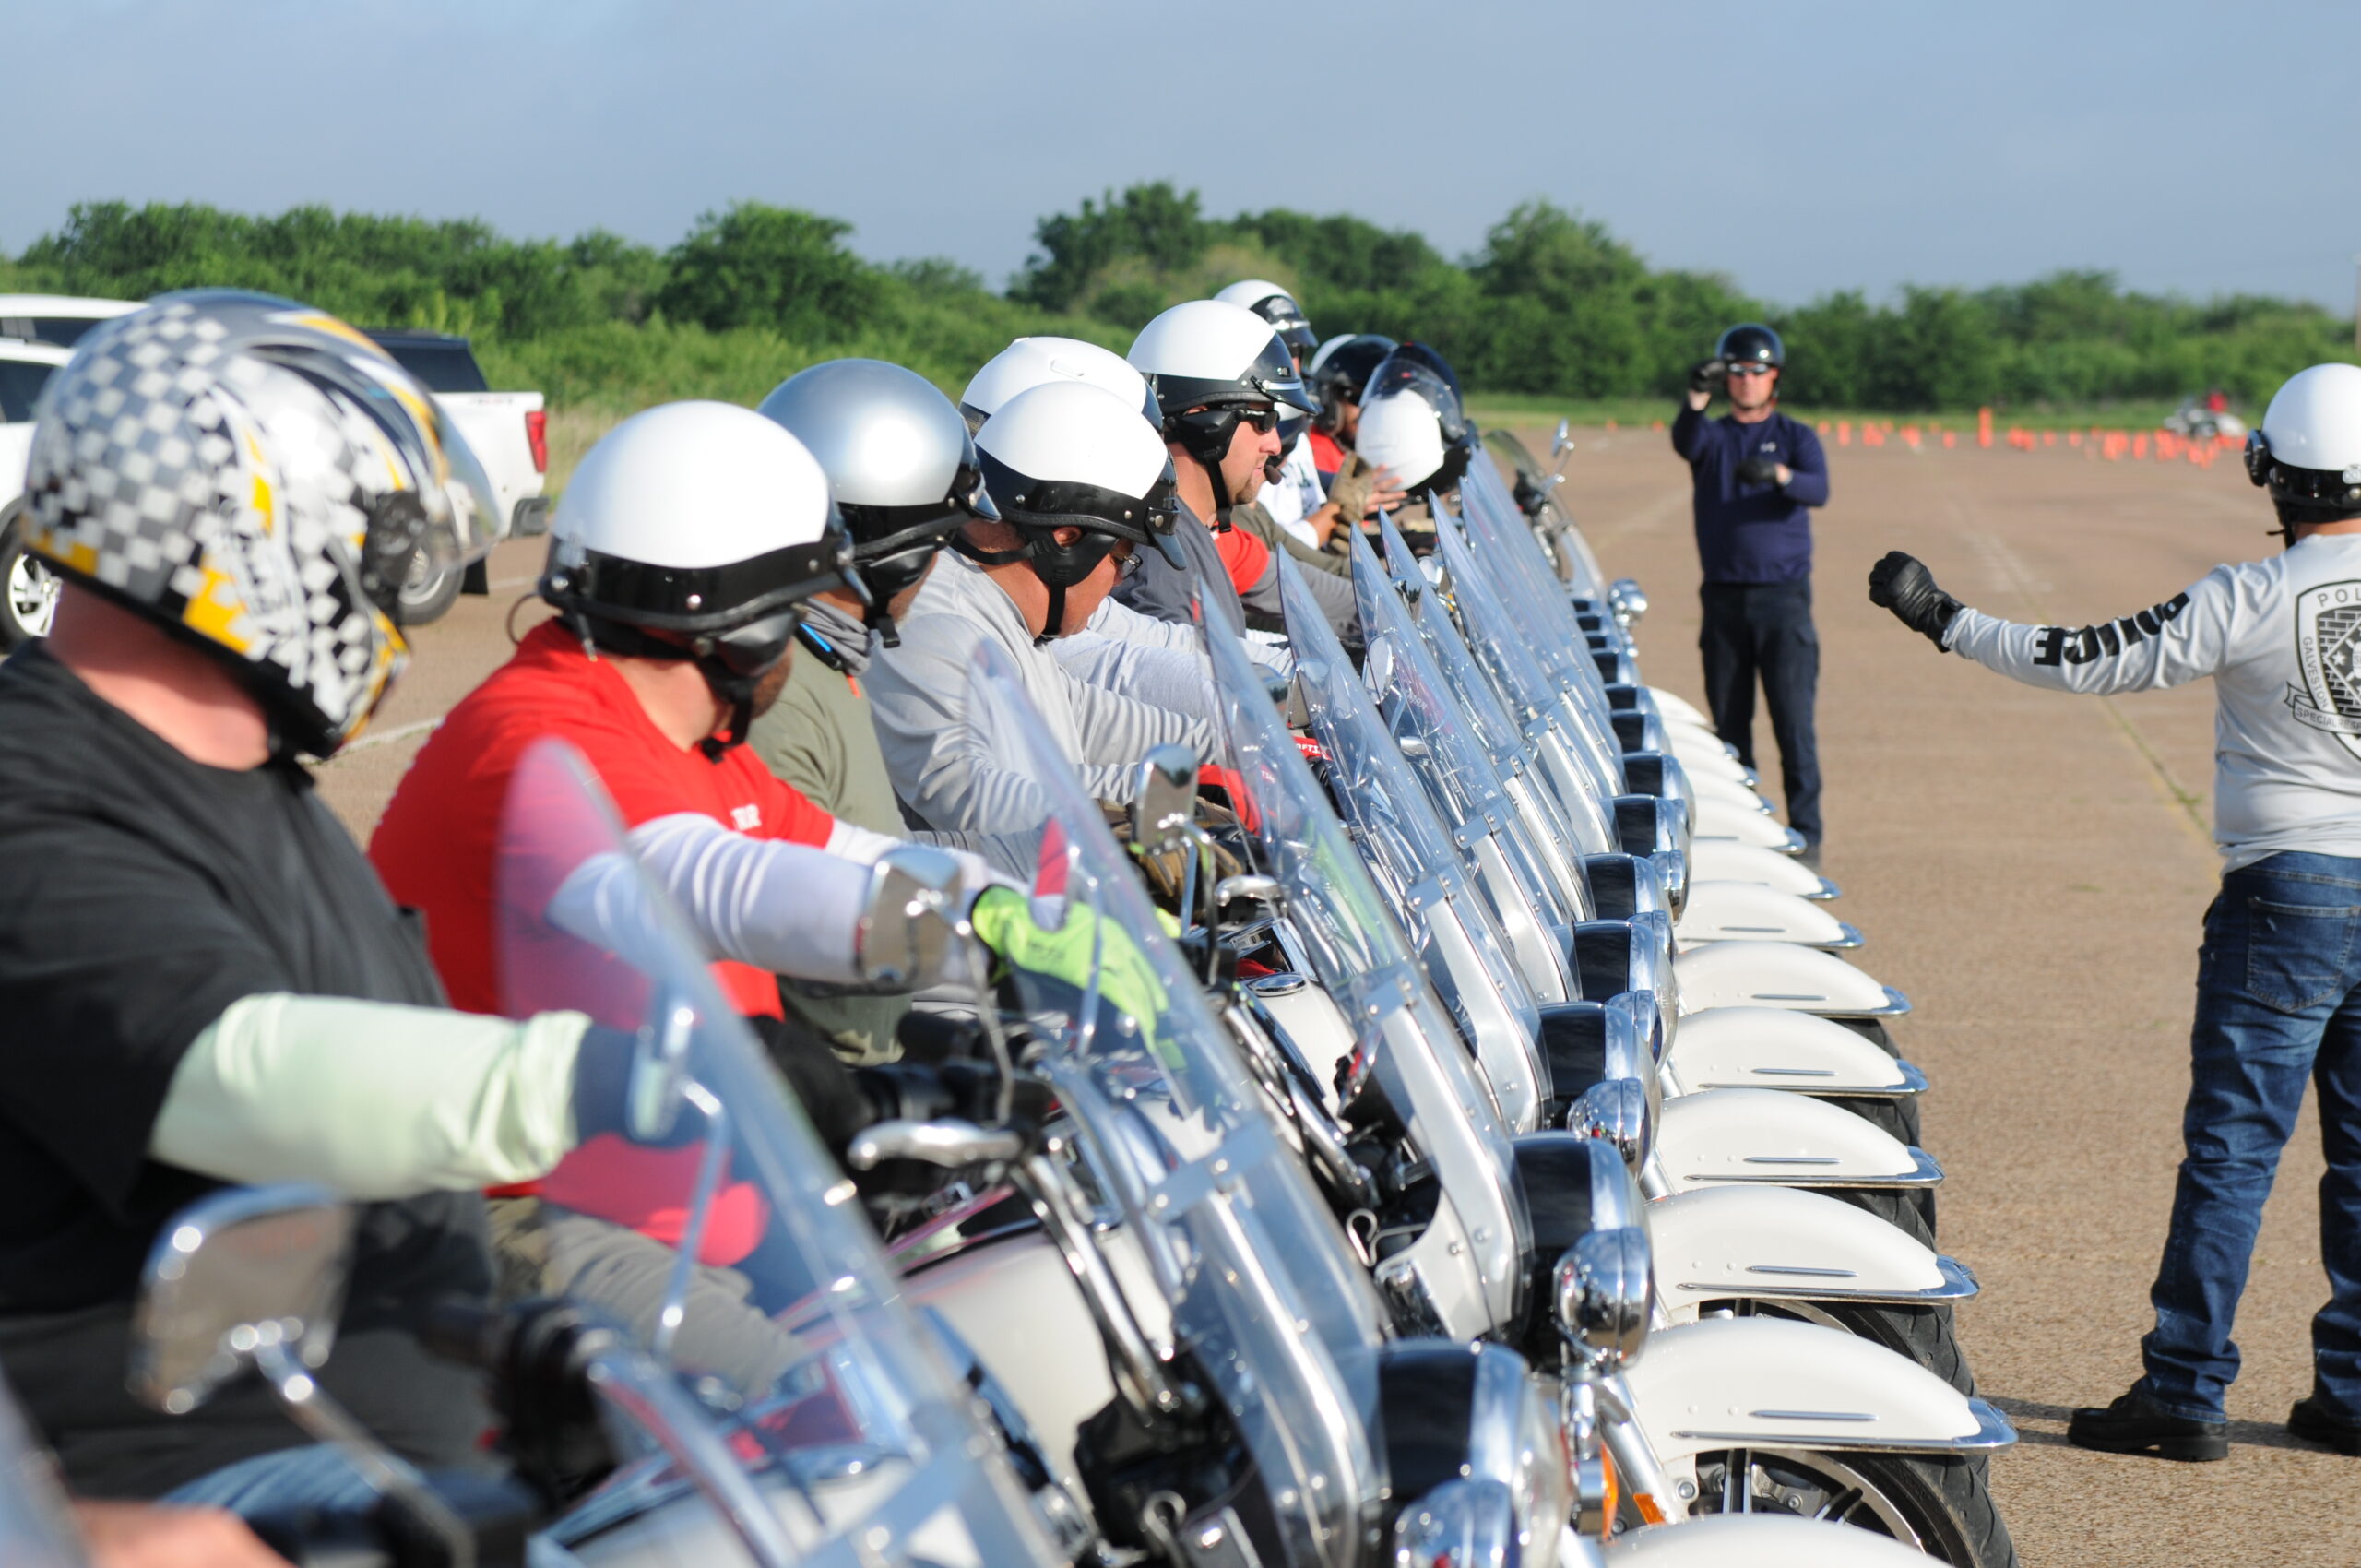 Instructor at the line with students learning to ride motorcycles